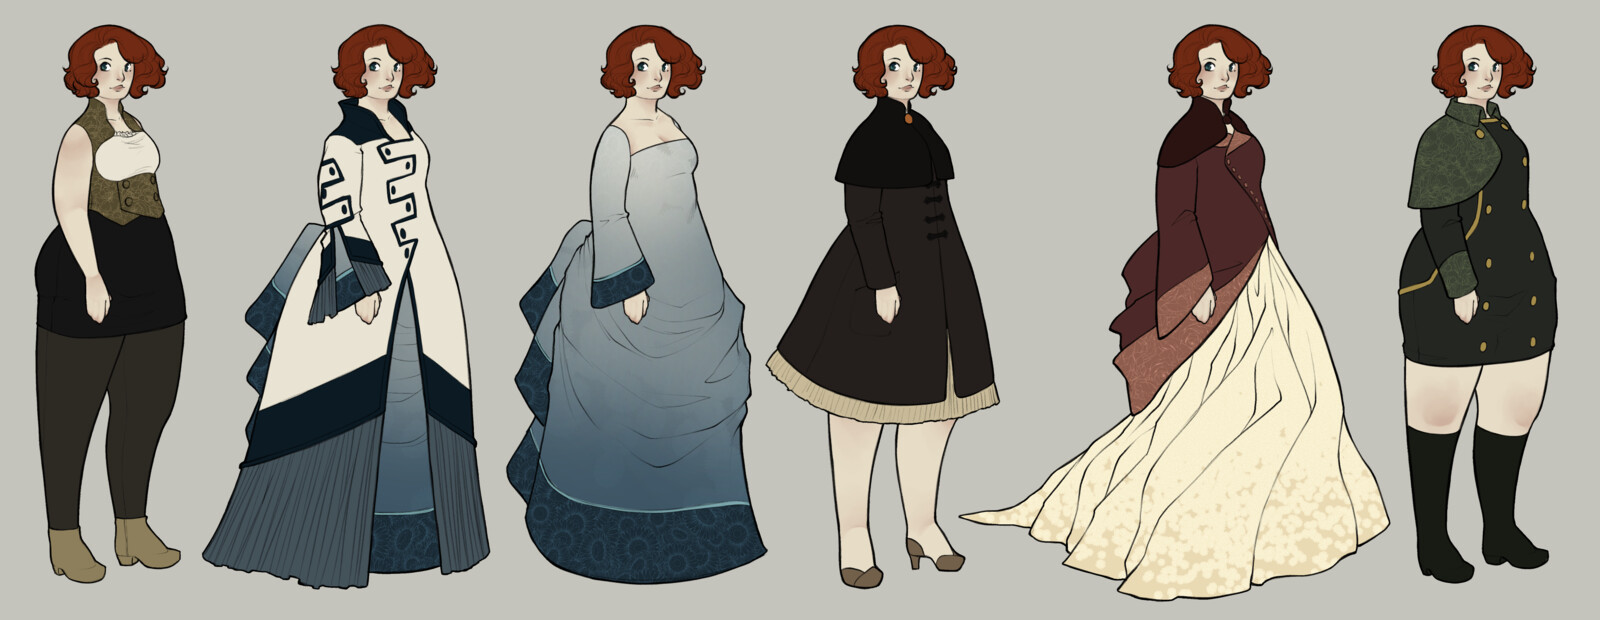 Final concept and wardrobe for principal protagonist, Millie.